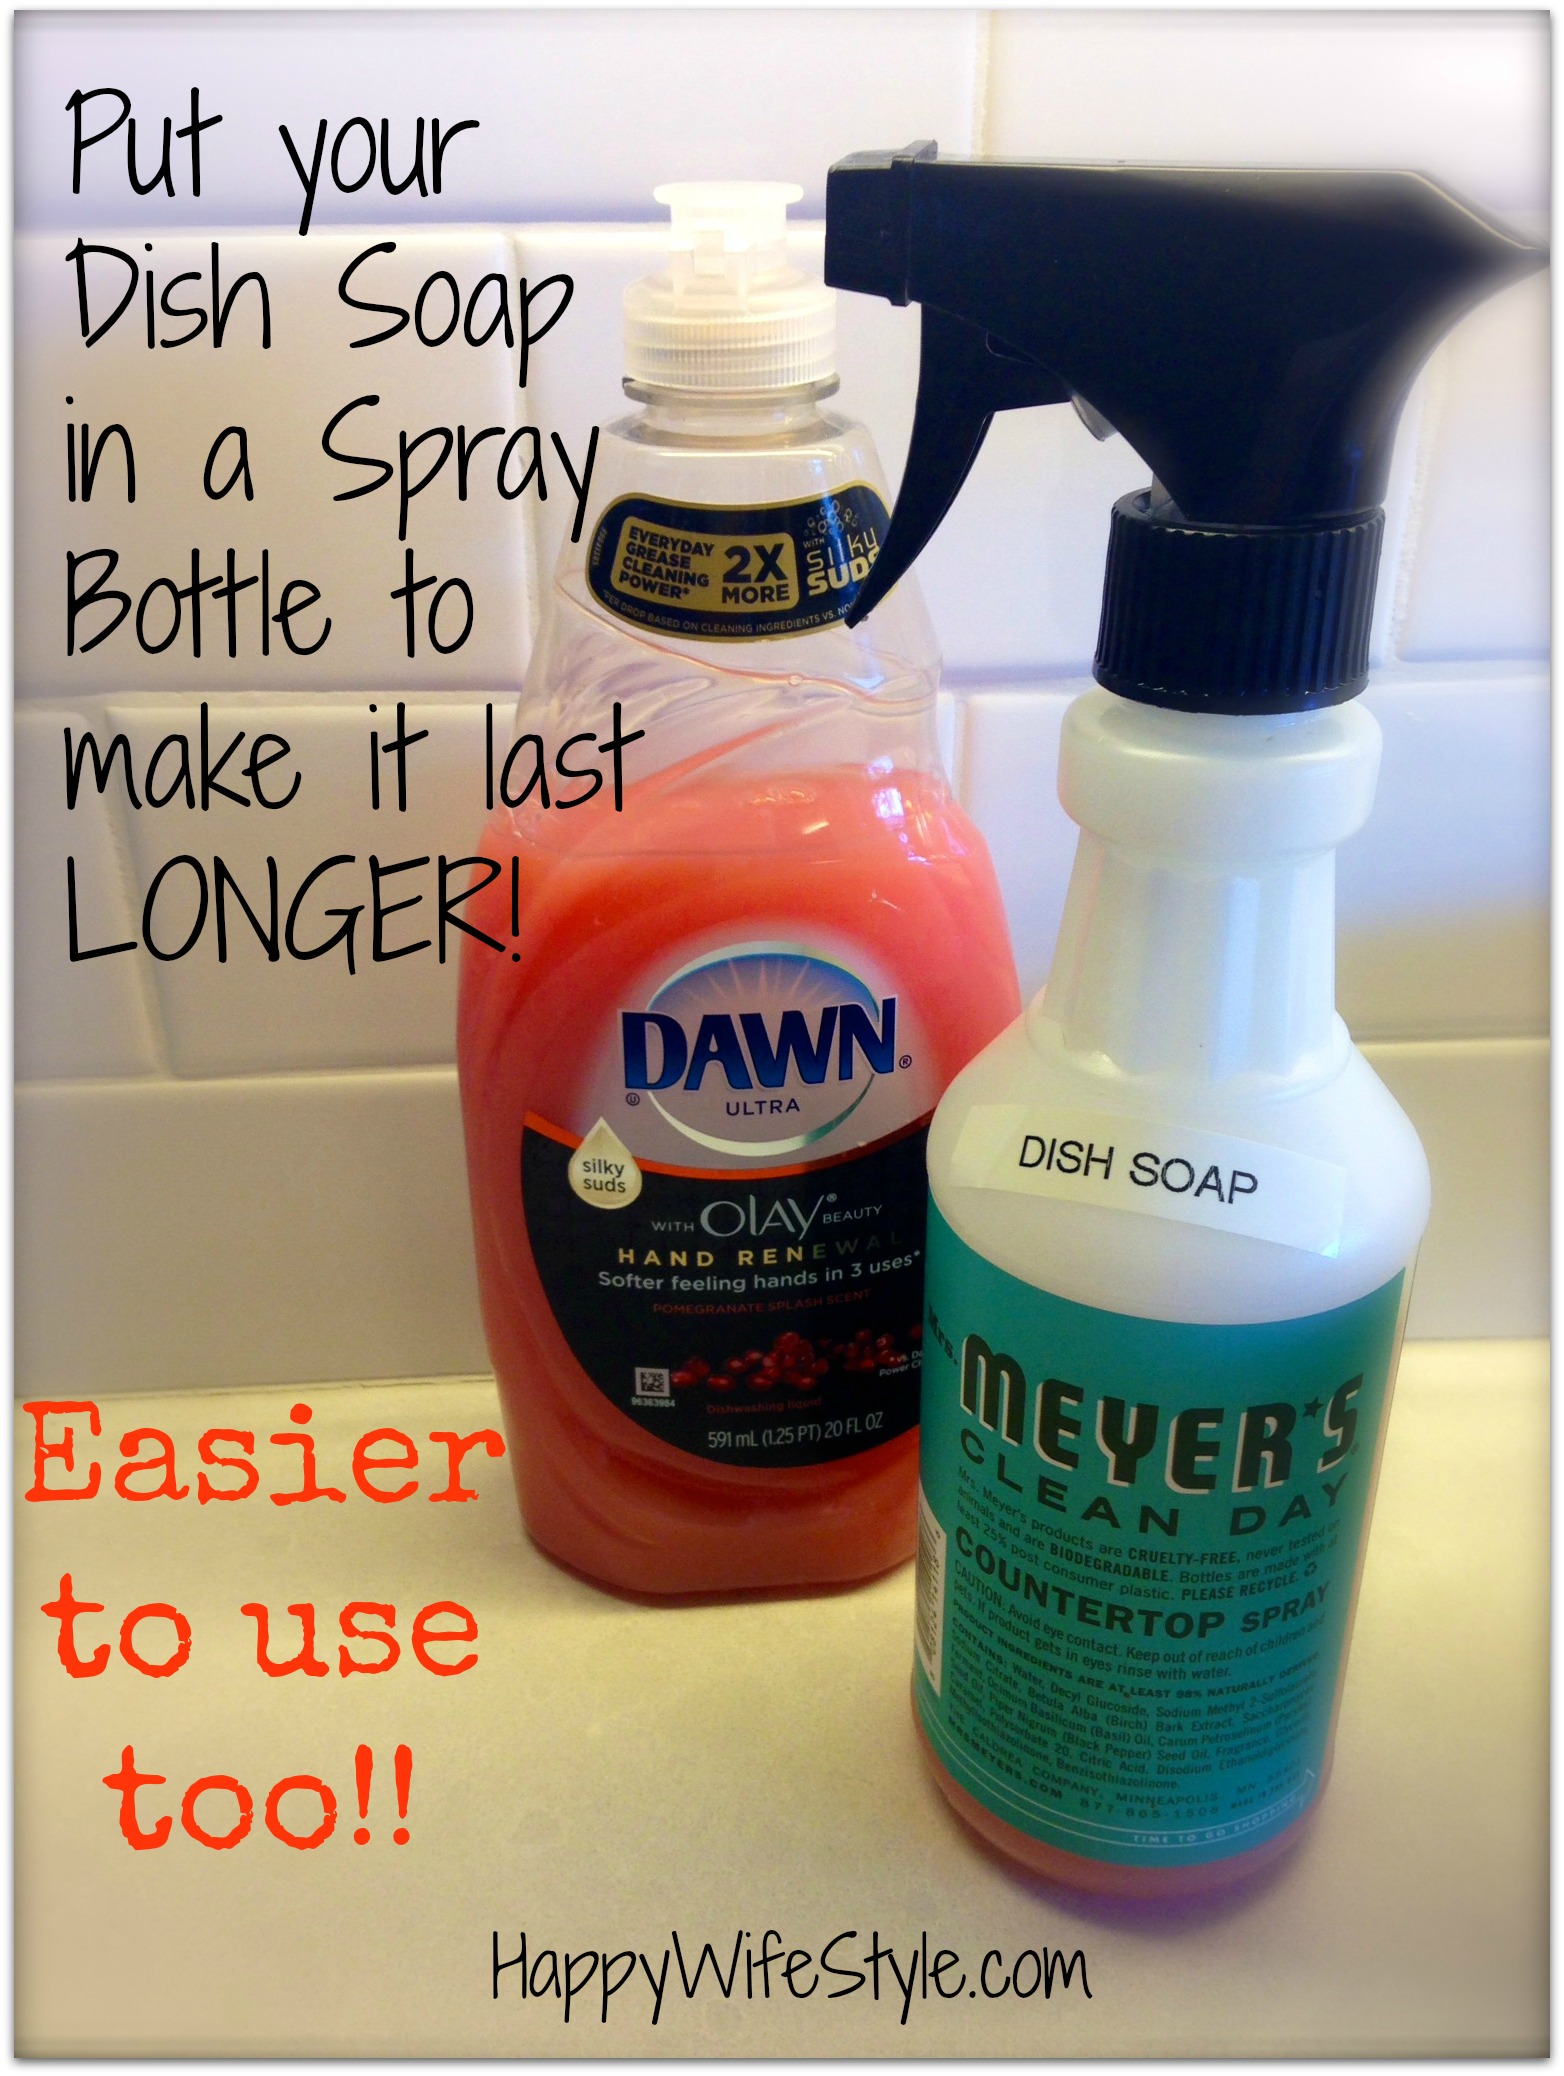 Put your Dish Soap in a spray bottle - lasts longer & easier to